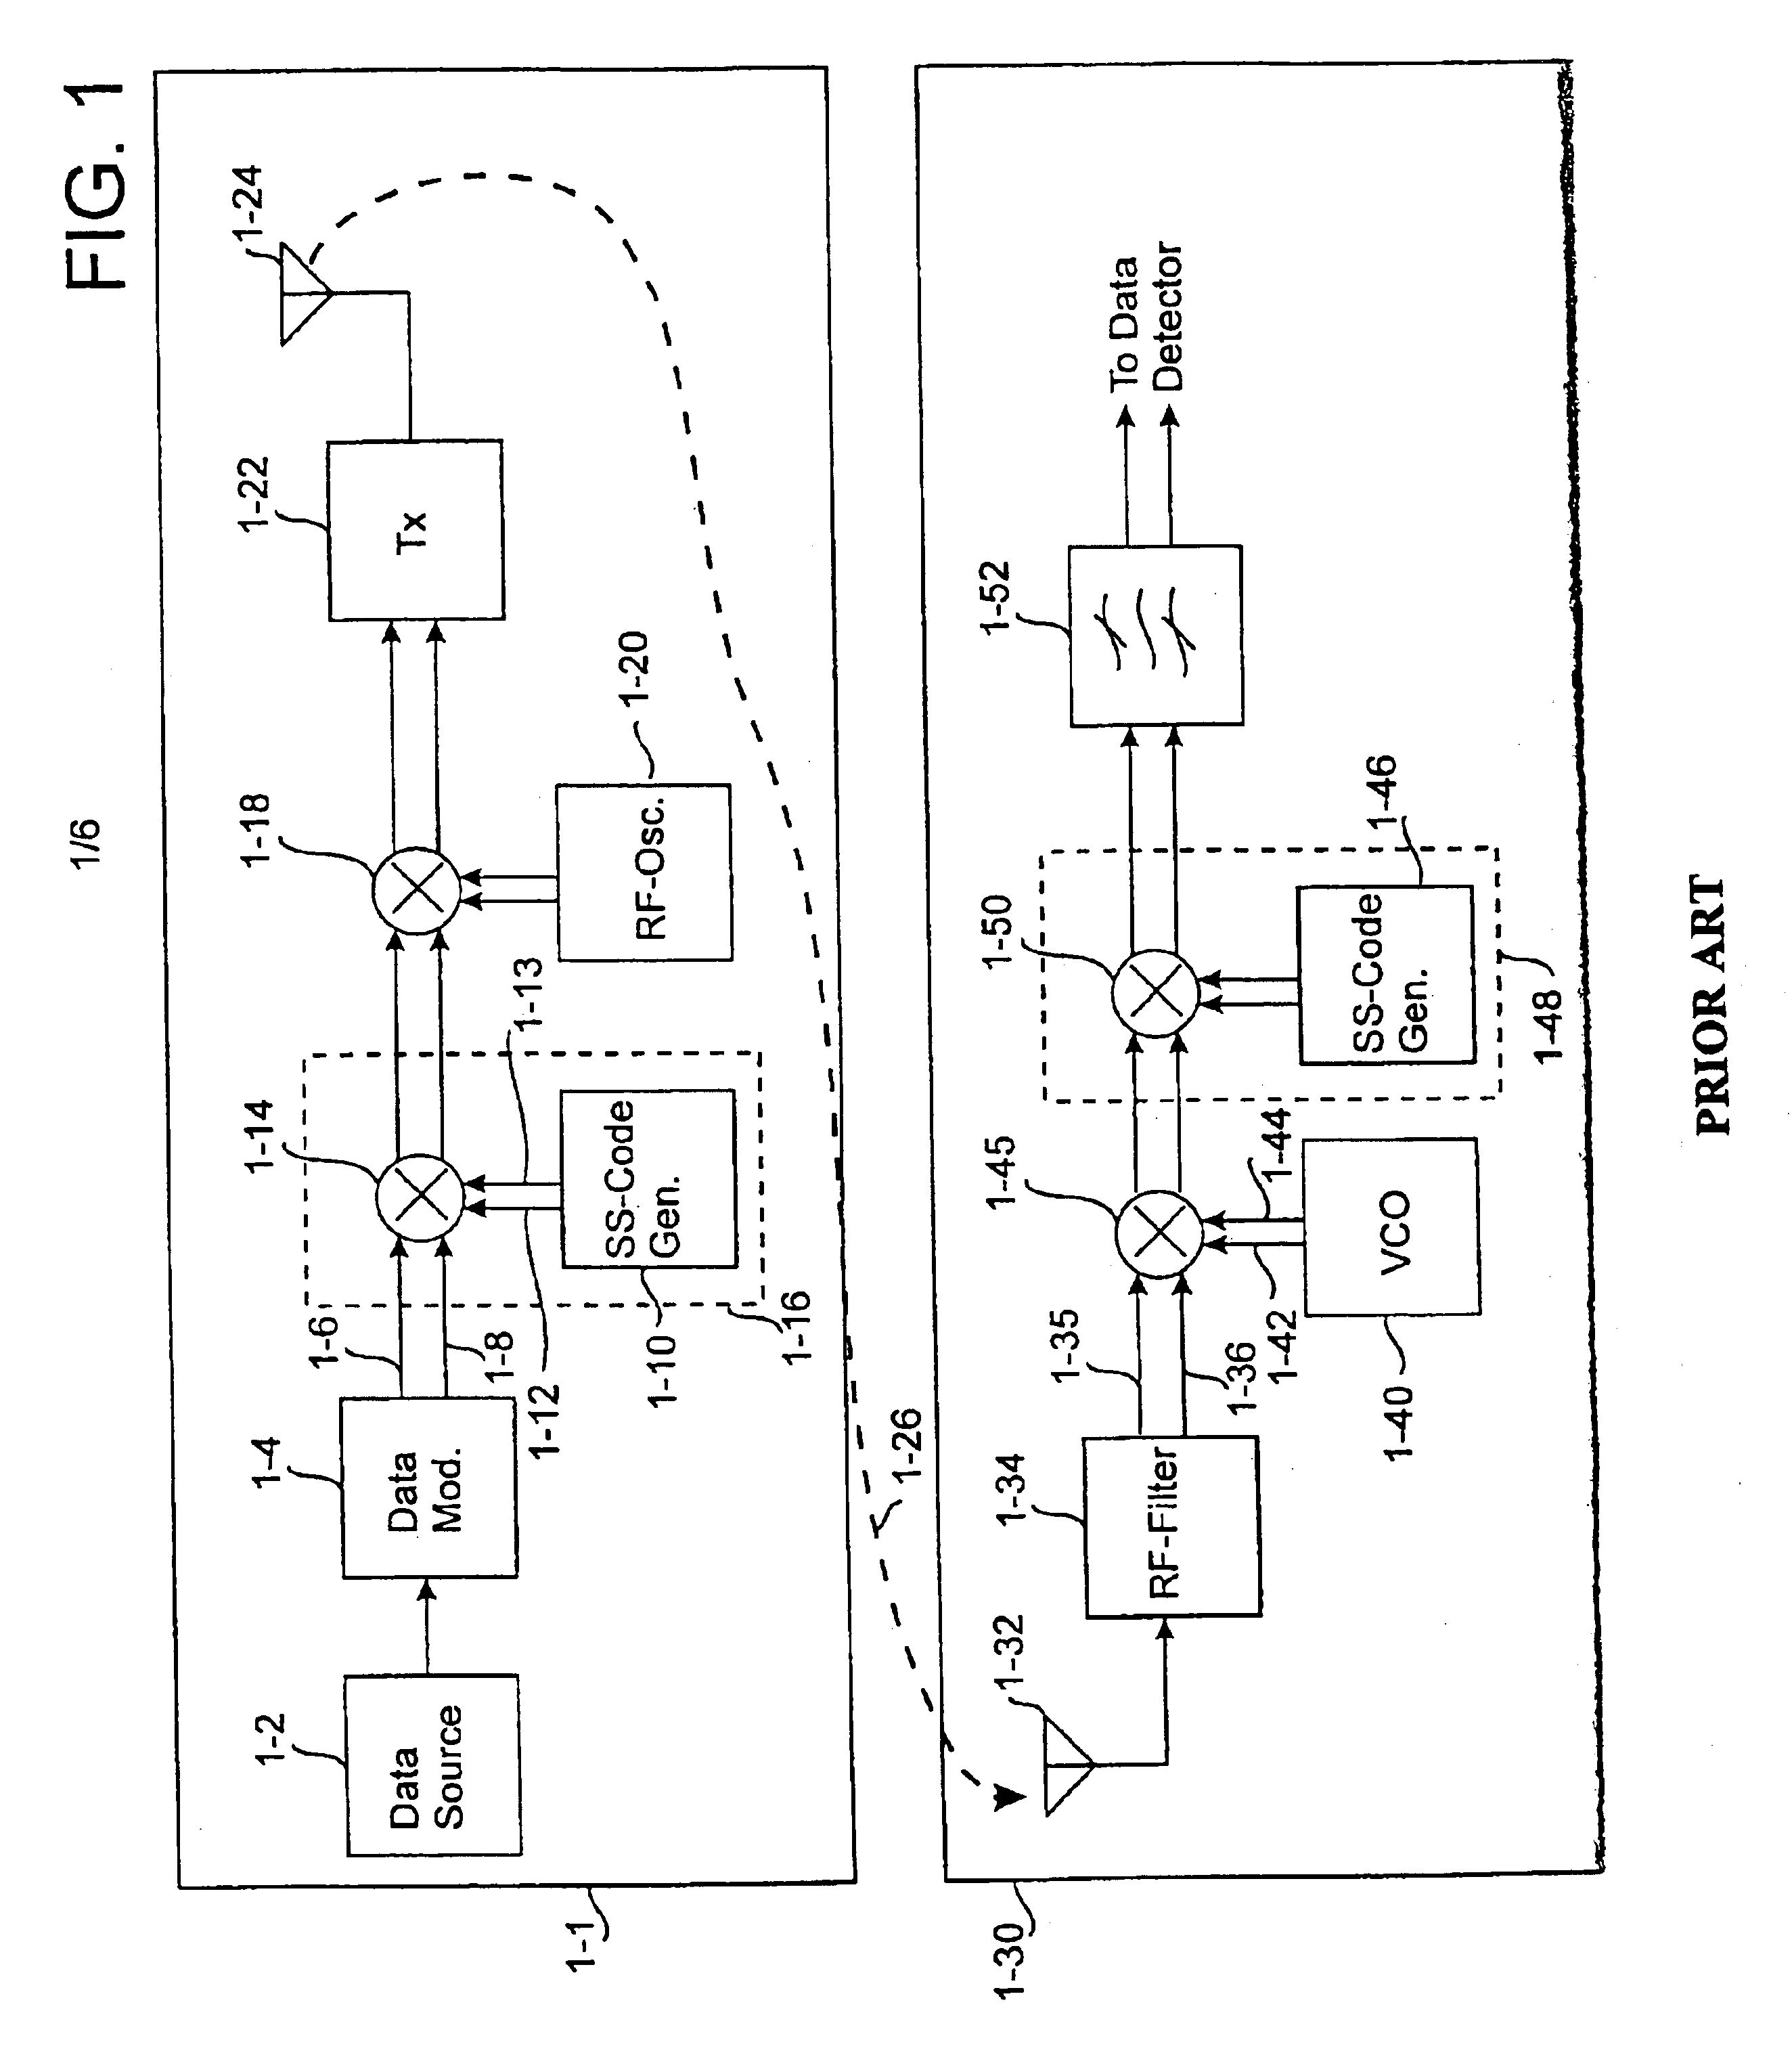 Signal acquisition system for spread spectrum receiver